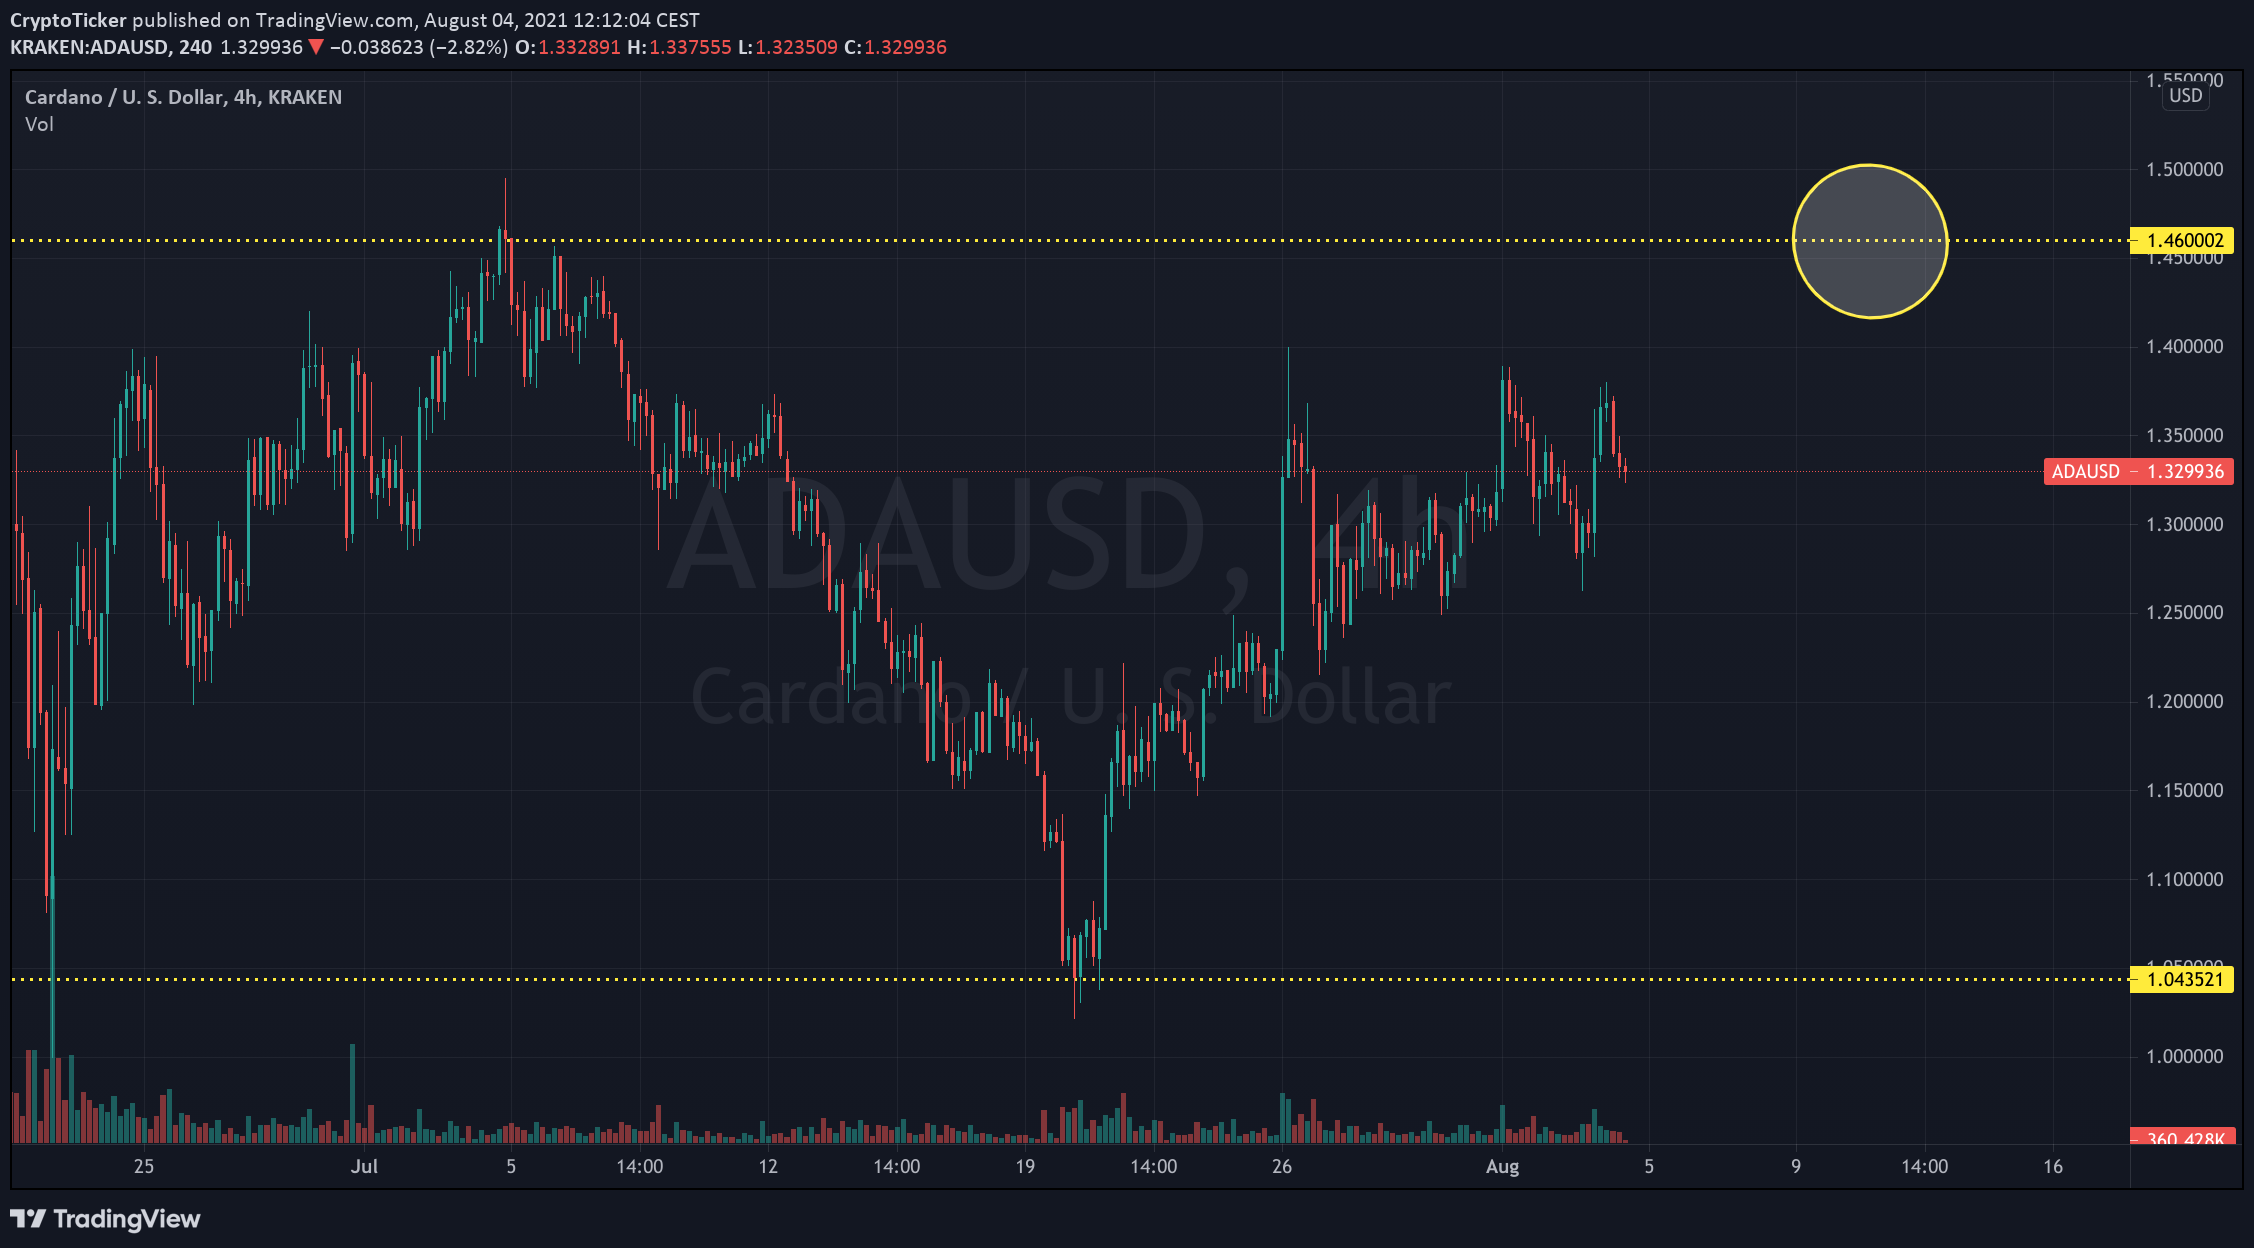 For Cardano price to reach 3$, ADA price should breach 1.46$ first